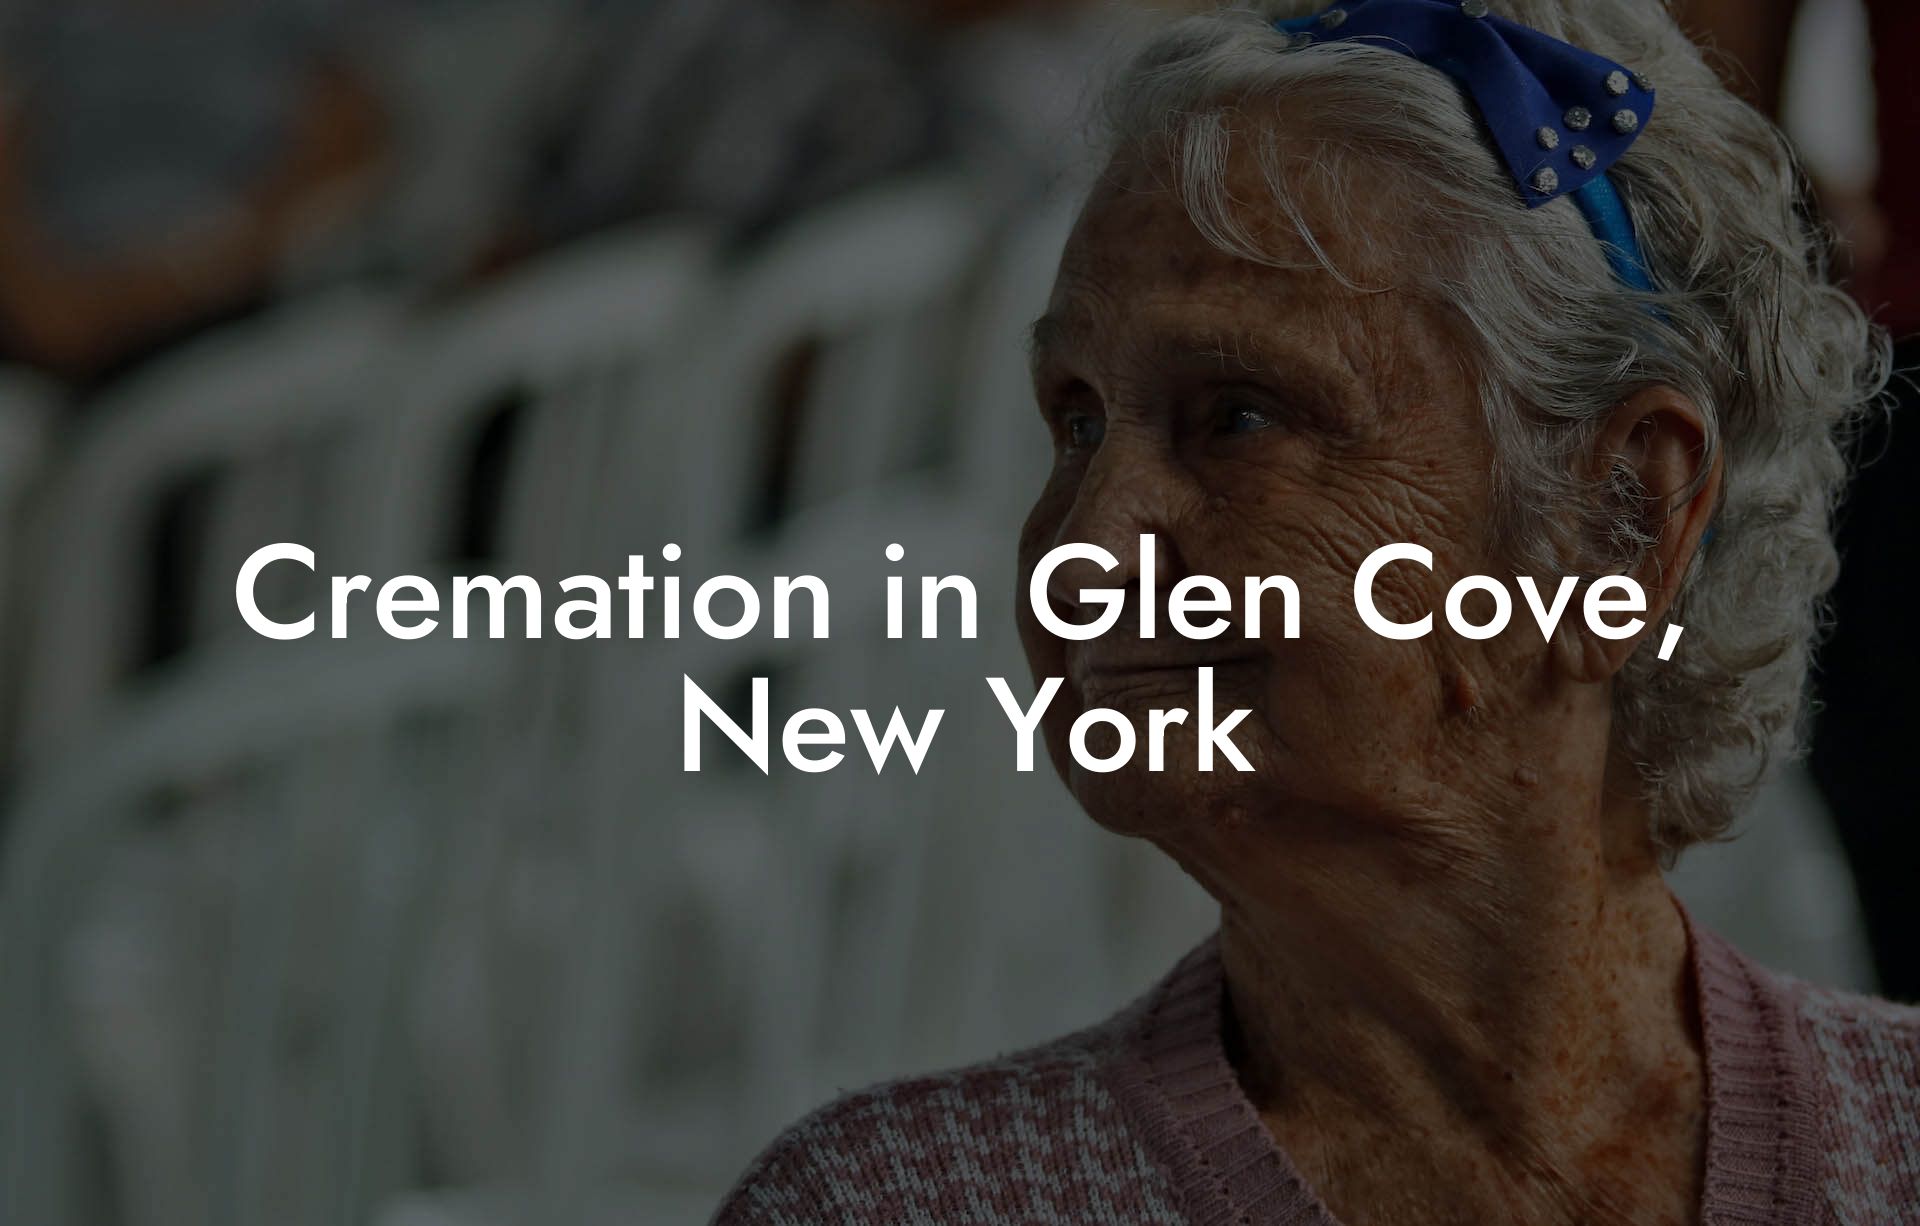 Cremation in Glen Cove, New York